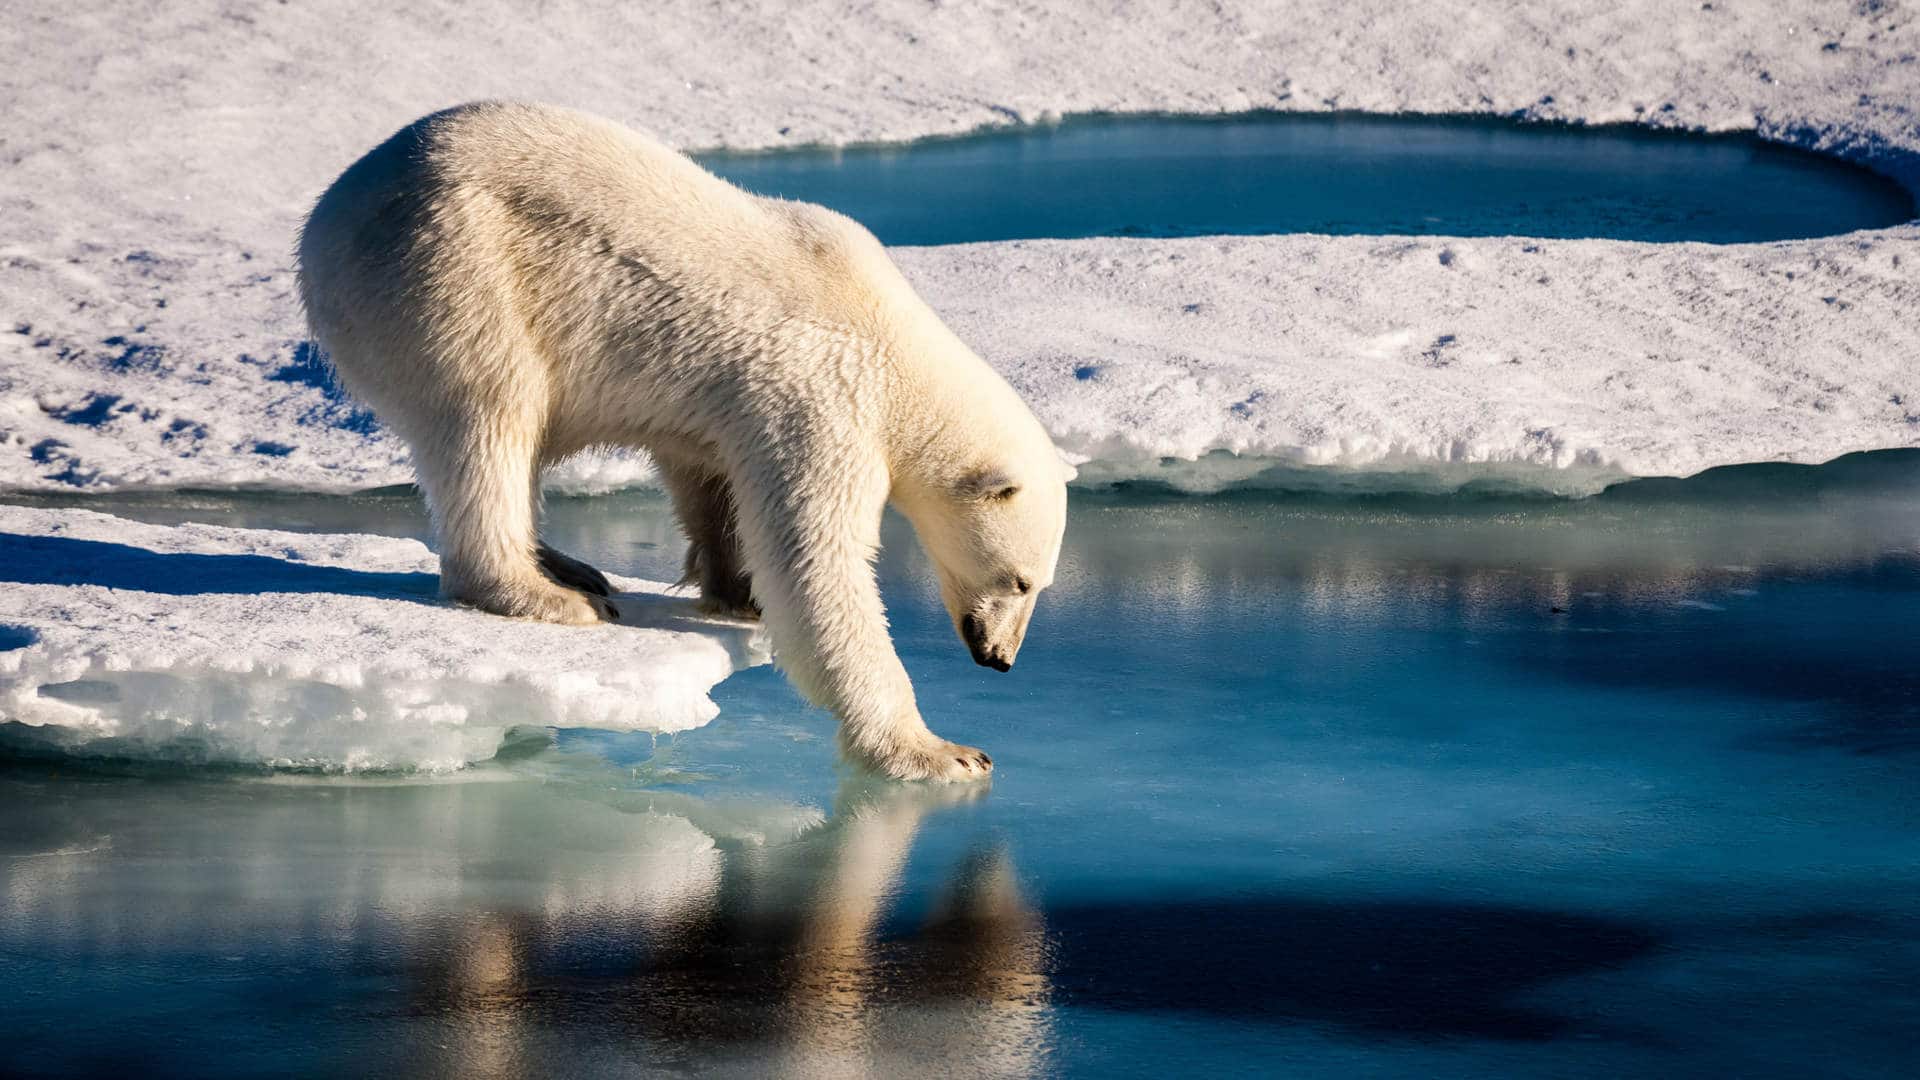 Polar bears already face shorter ice seasons due to climate change, limiting prime hunting and breeding opportunities.